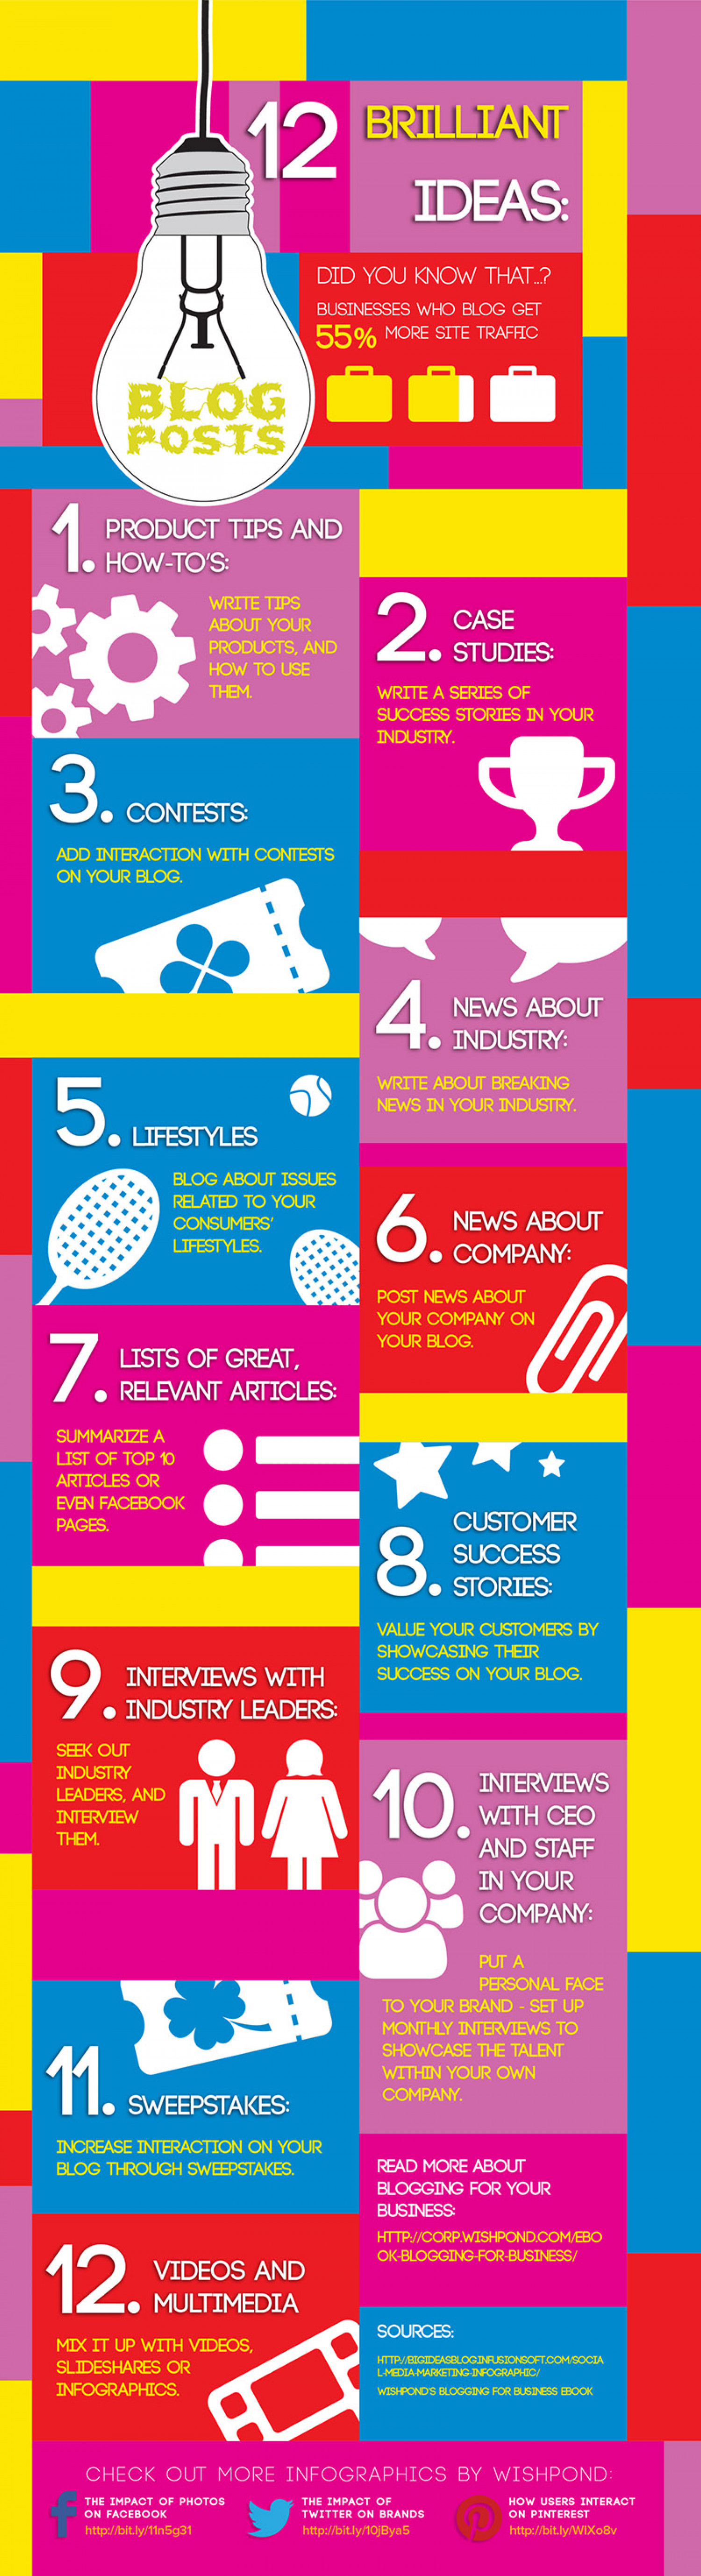 12 Brilliant Blog Post Ideas for Businesses Infographic